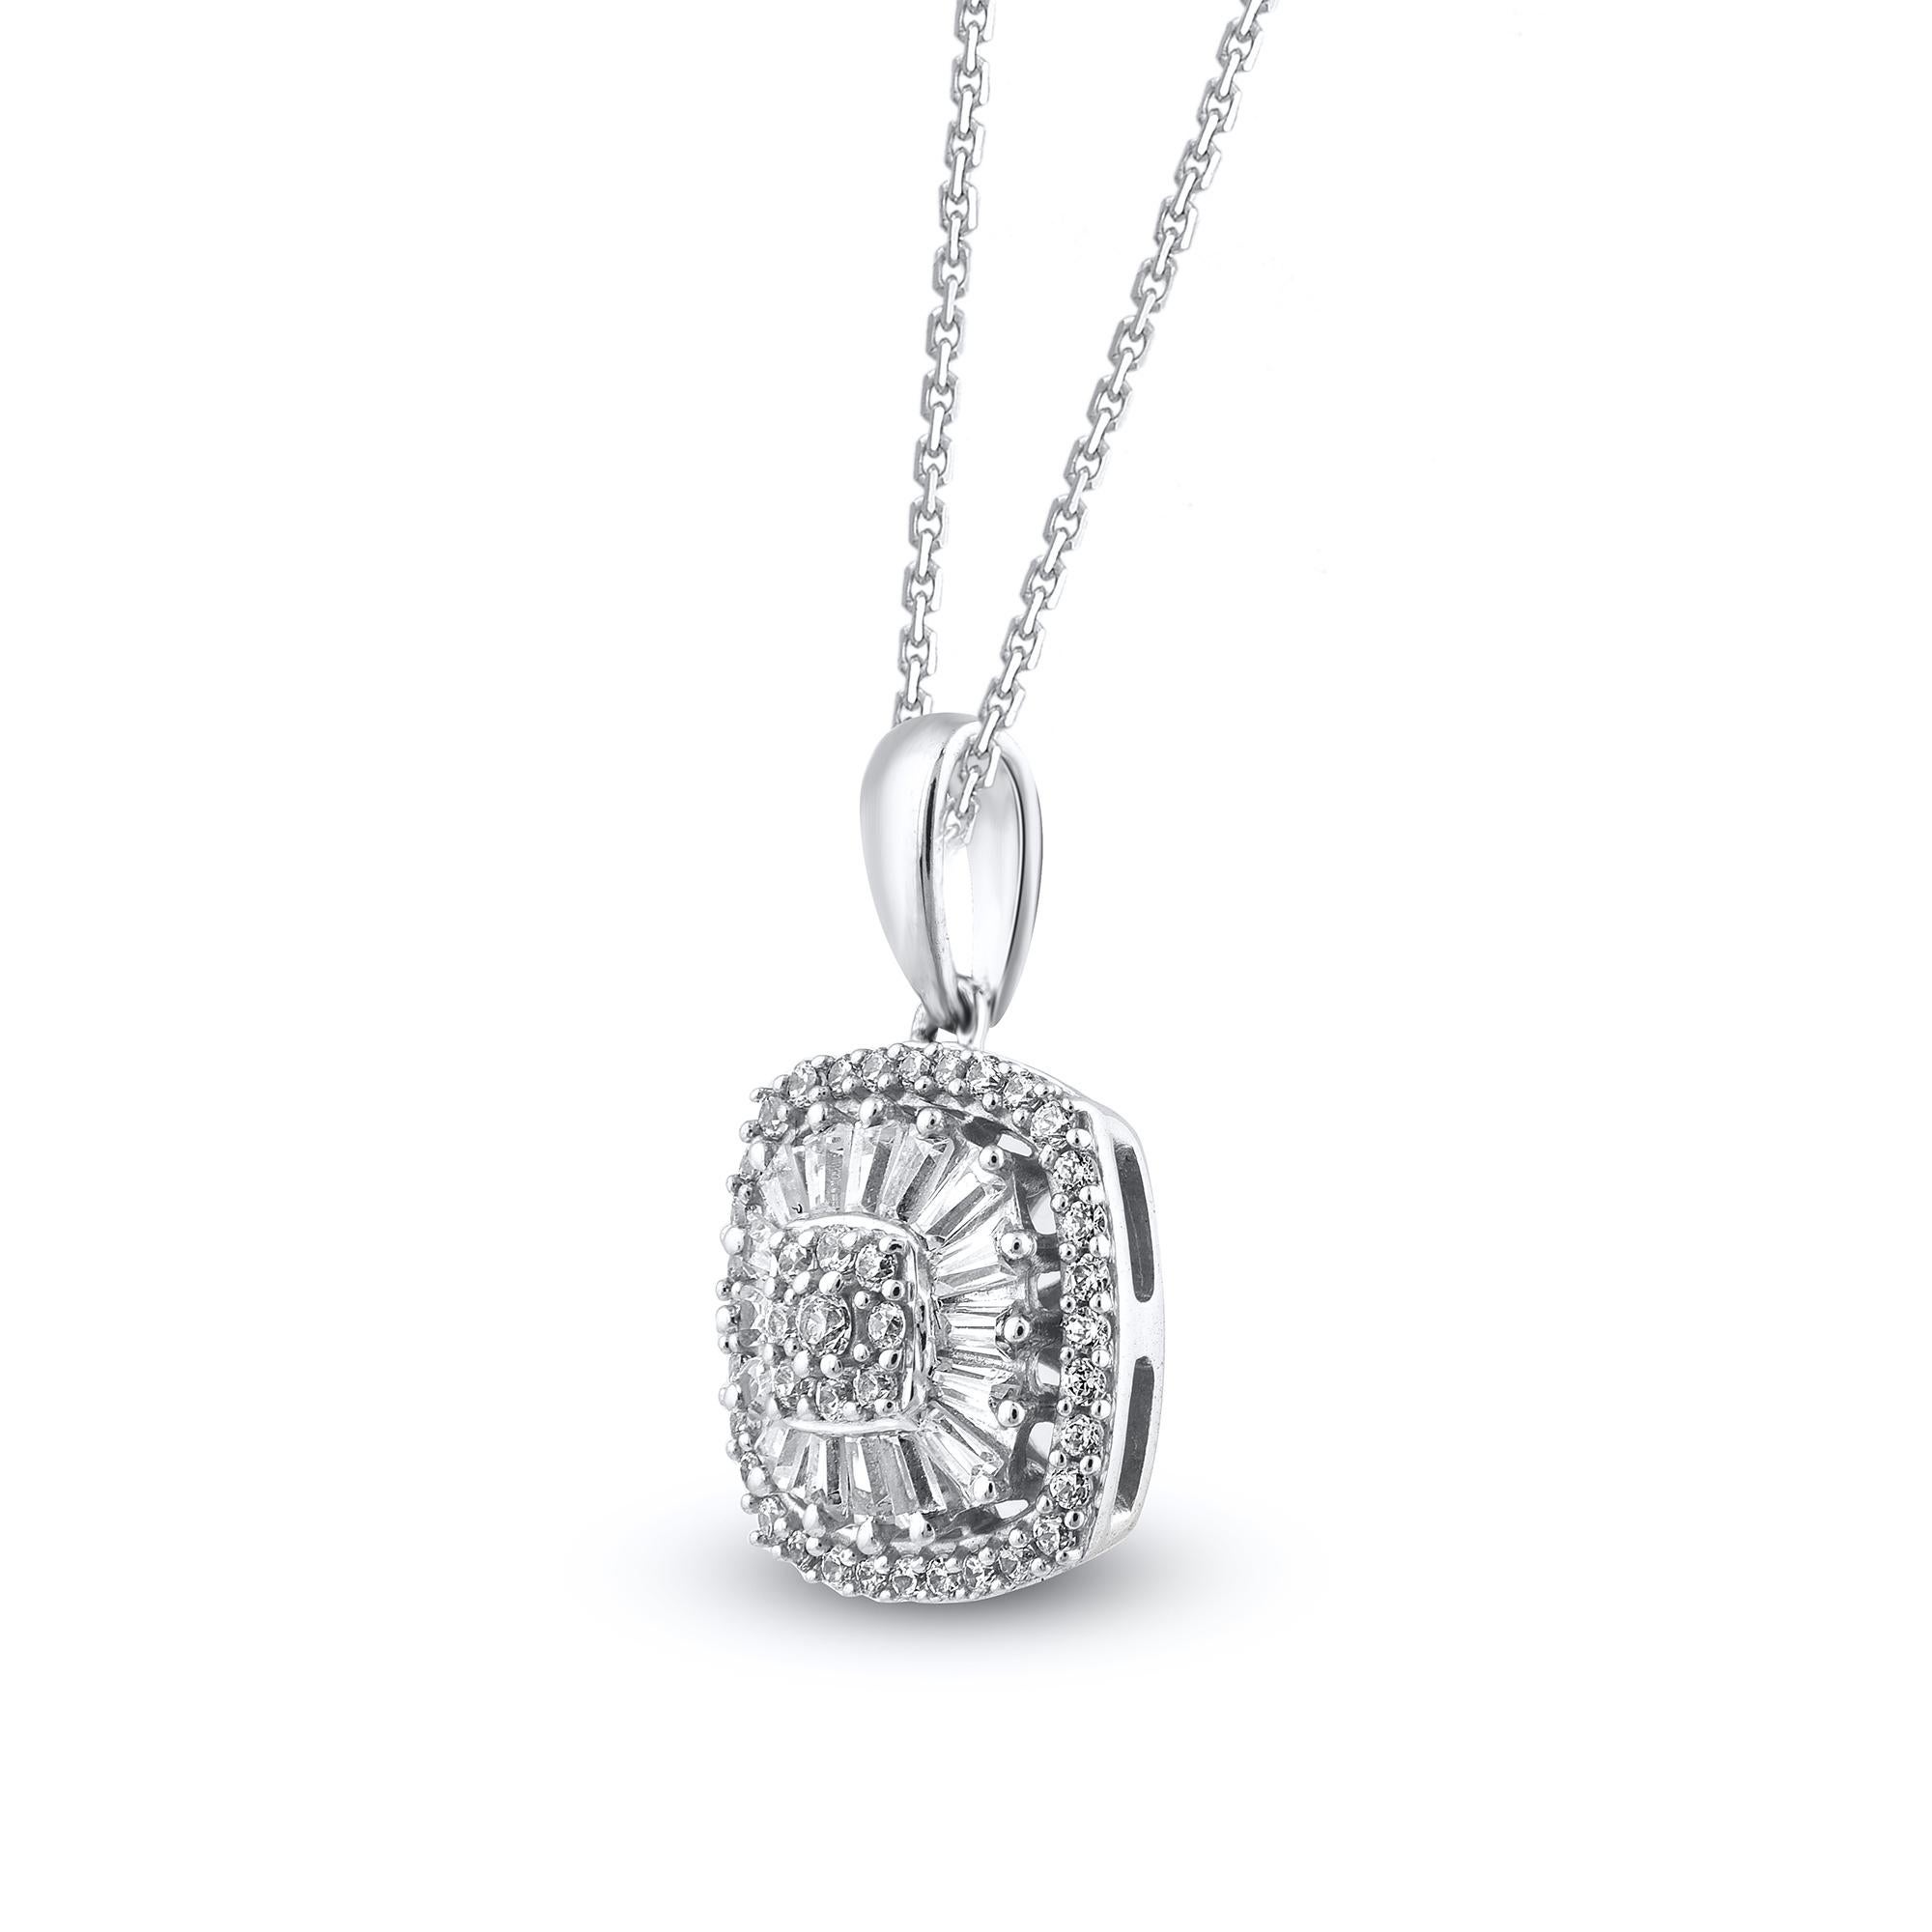 This beautiful cushion pendant necklace is studded with 57 brilliant cut round diamonds and baguette cut diamonds in prong and channel setting. The total diamond weight of these pendant is 0.33 carats. All the diamonds are H-I color, I-2 clarity.